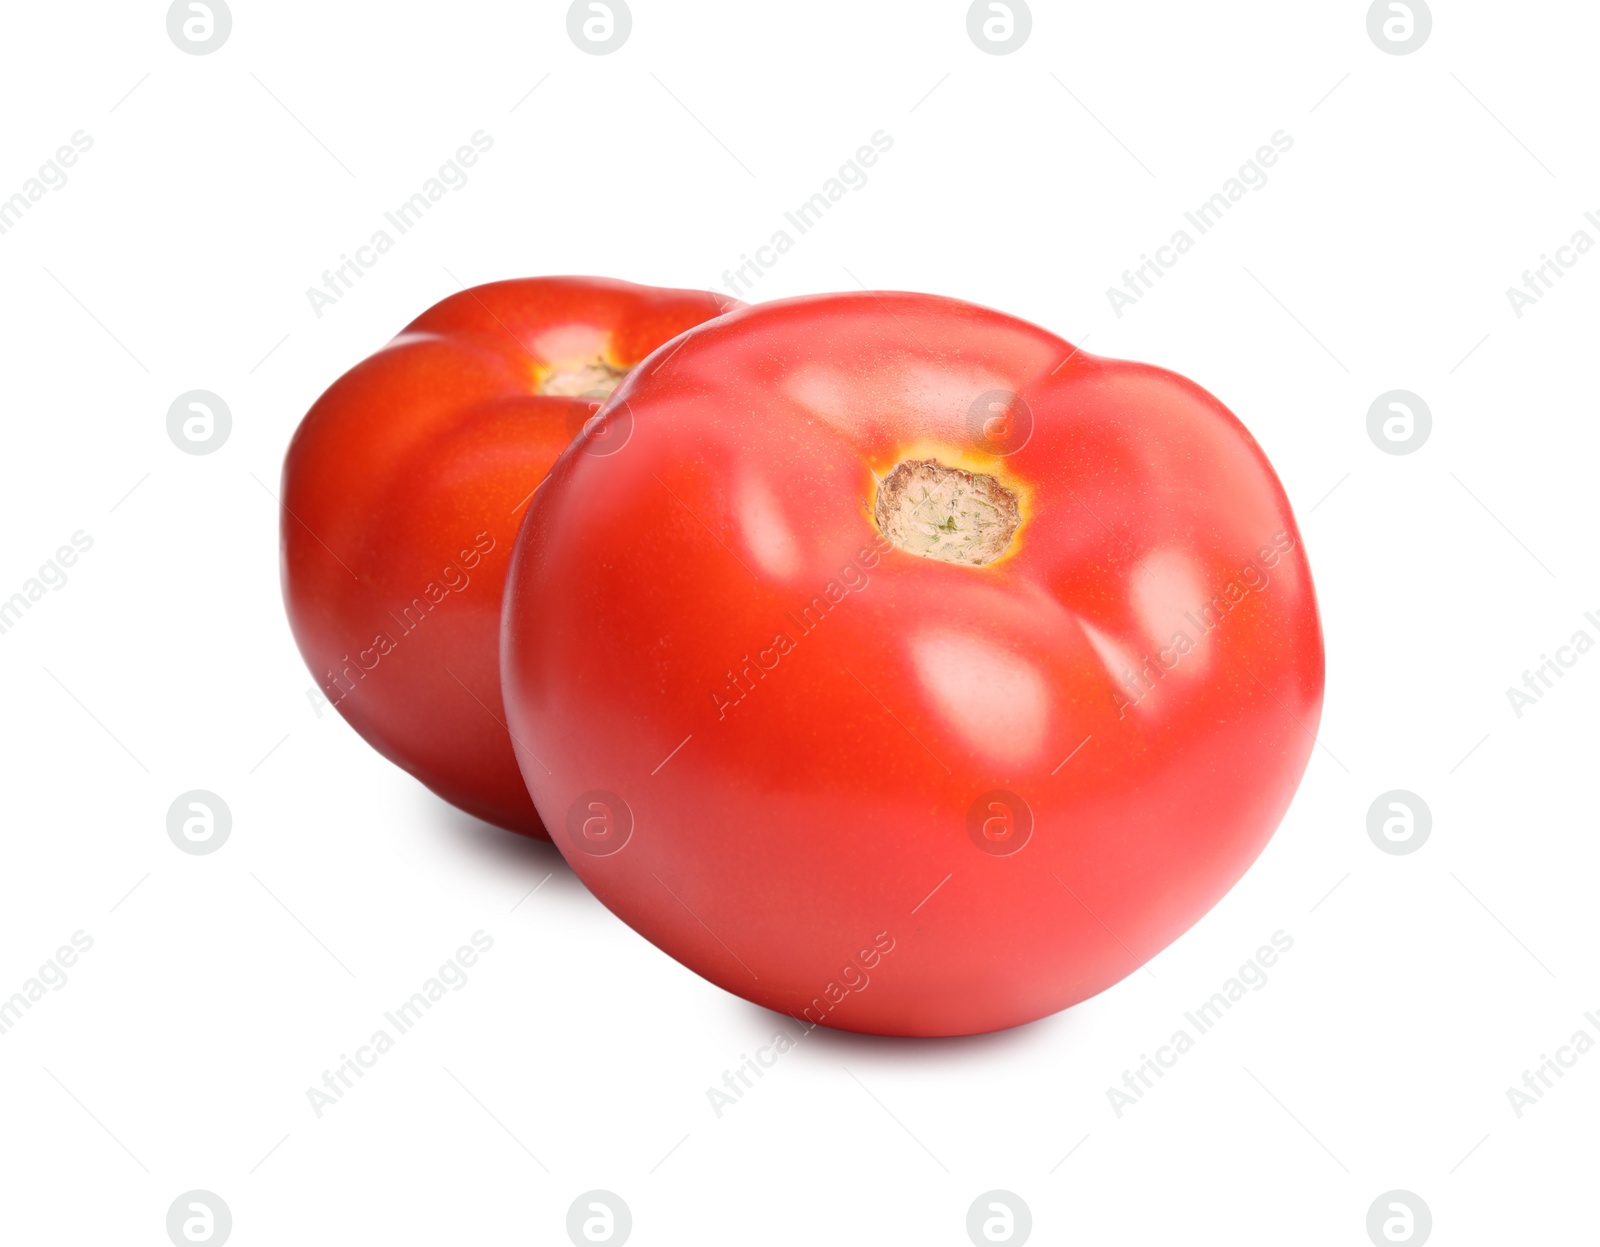 Photo of Fresh ripe red tomatoes on white background